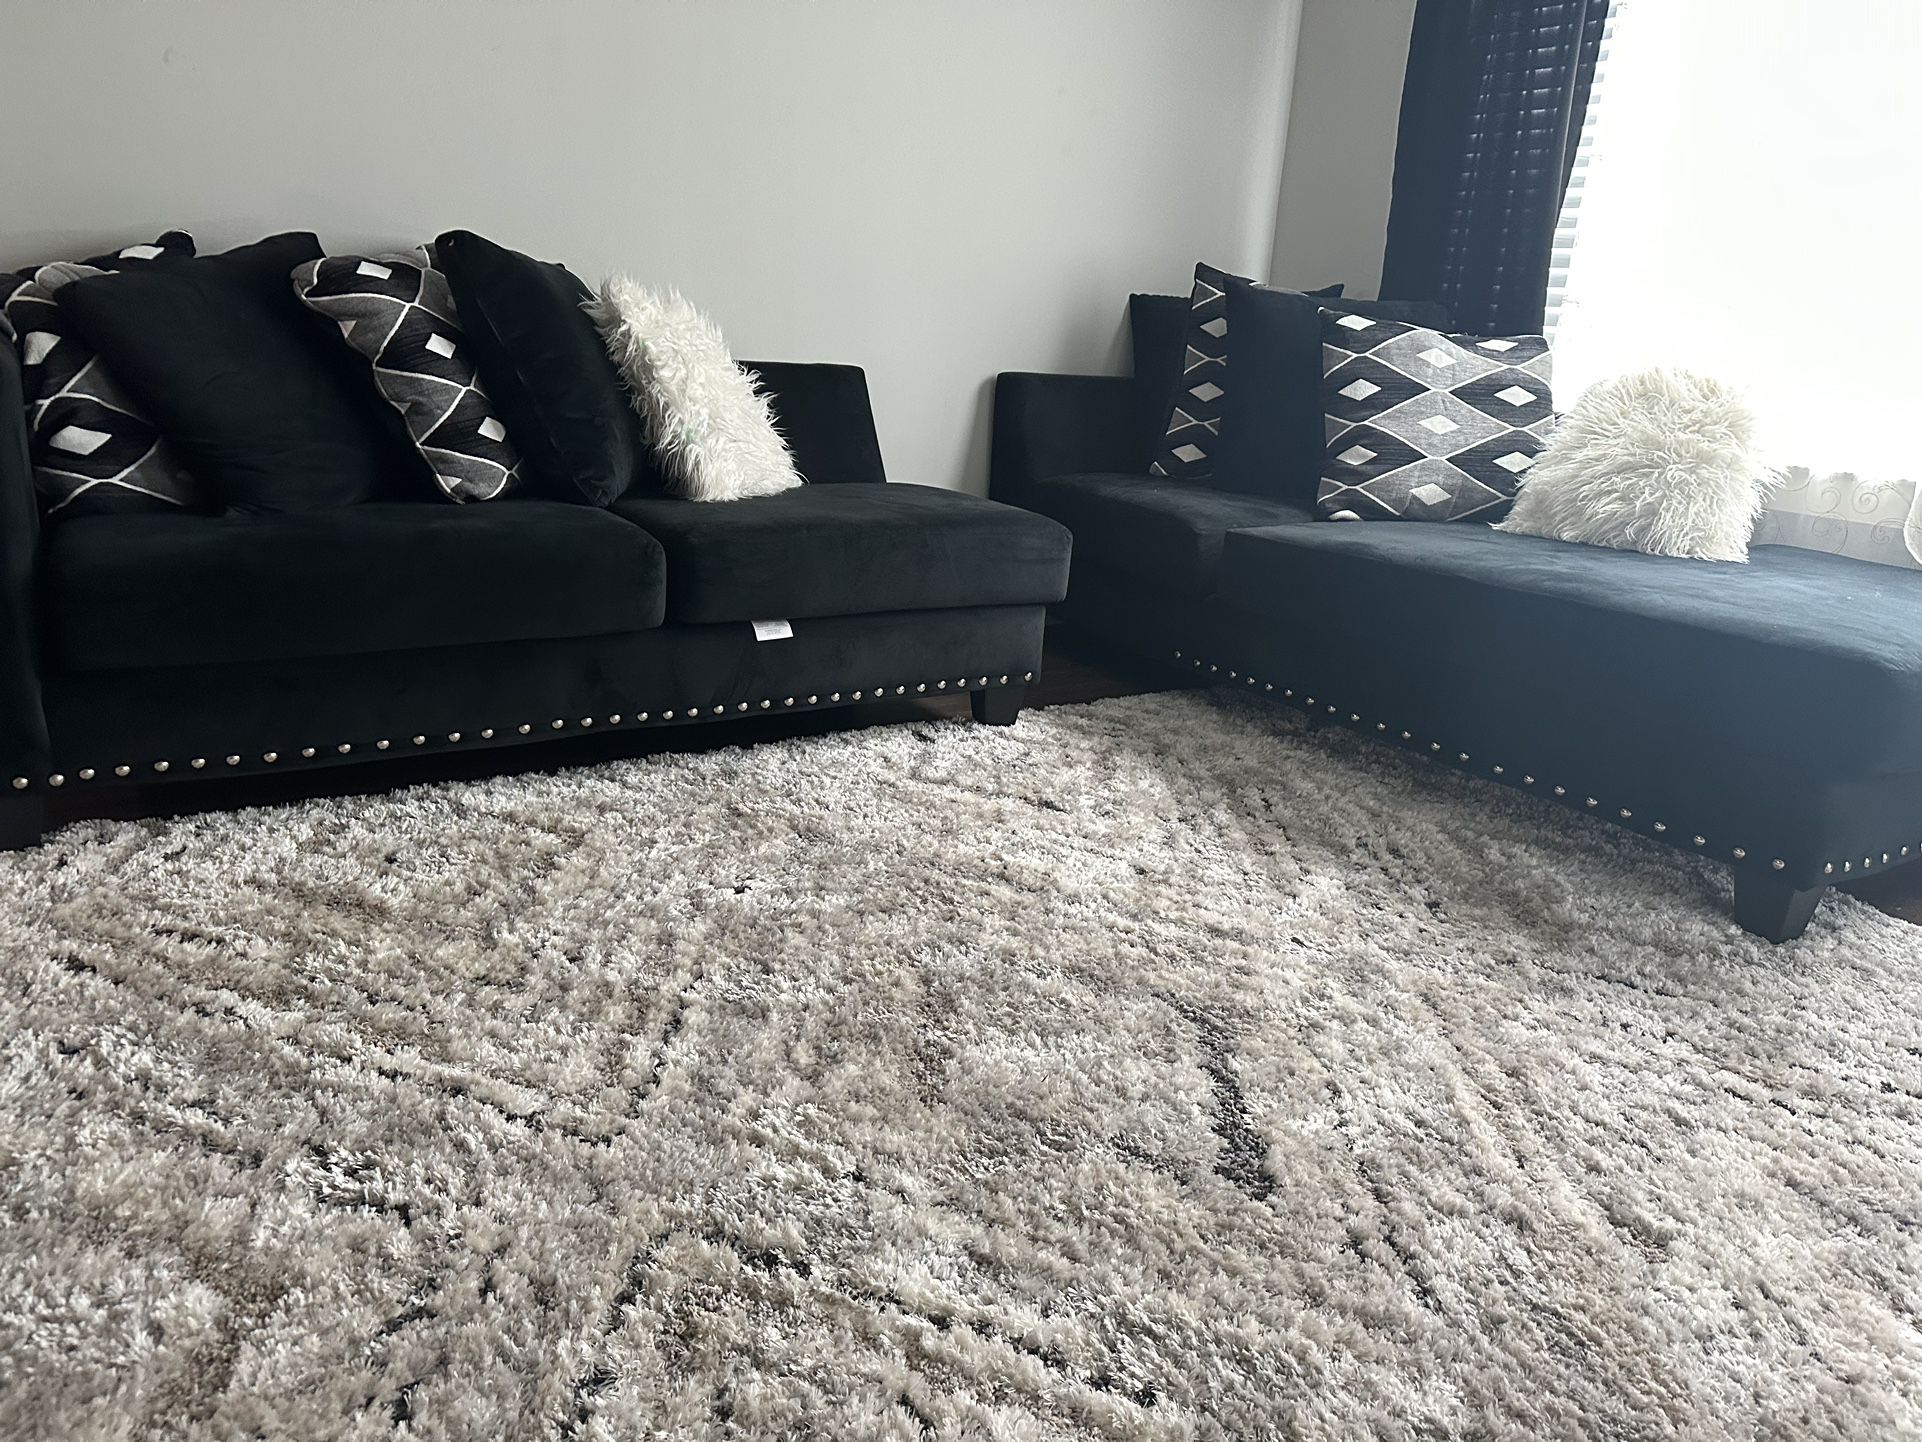 Black Couch For Sale 